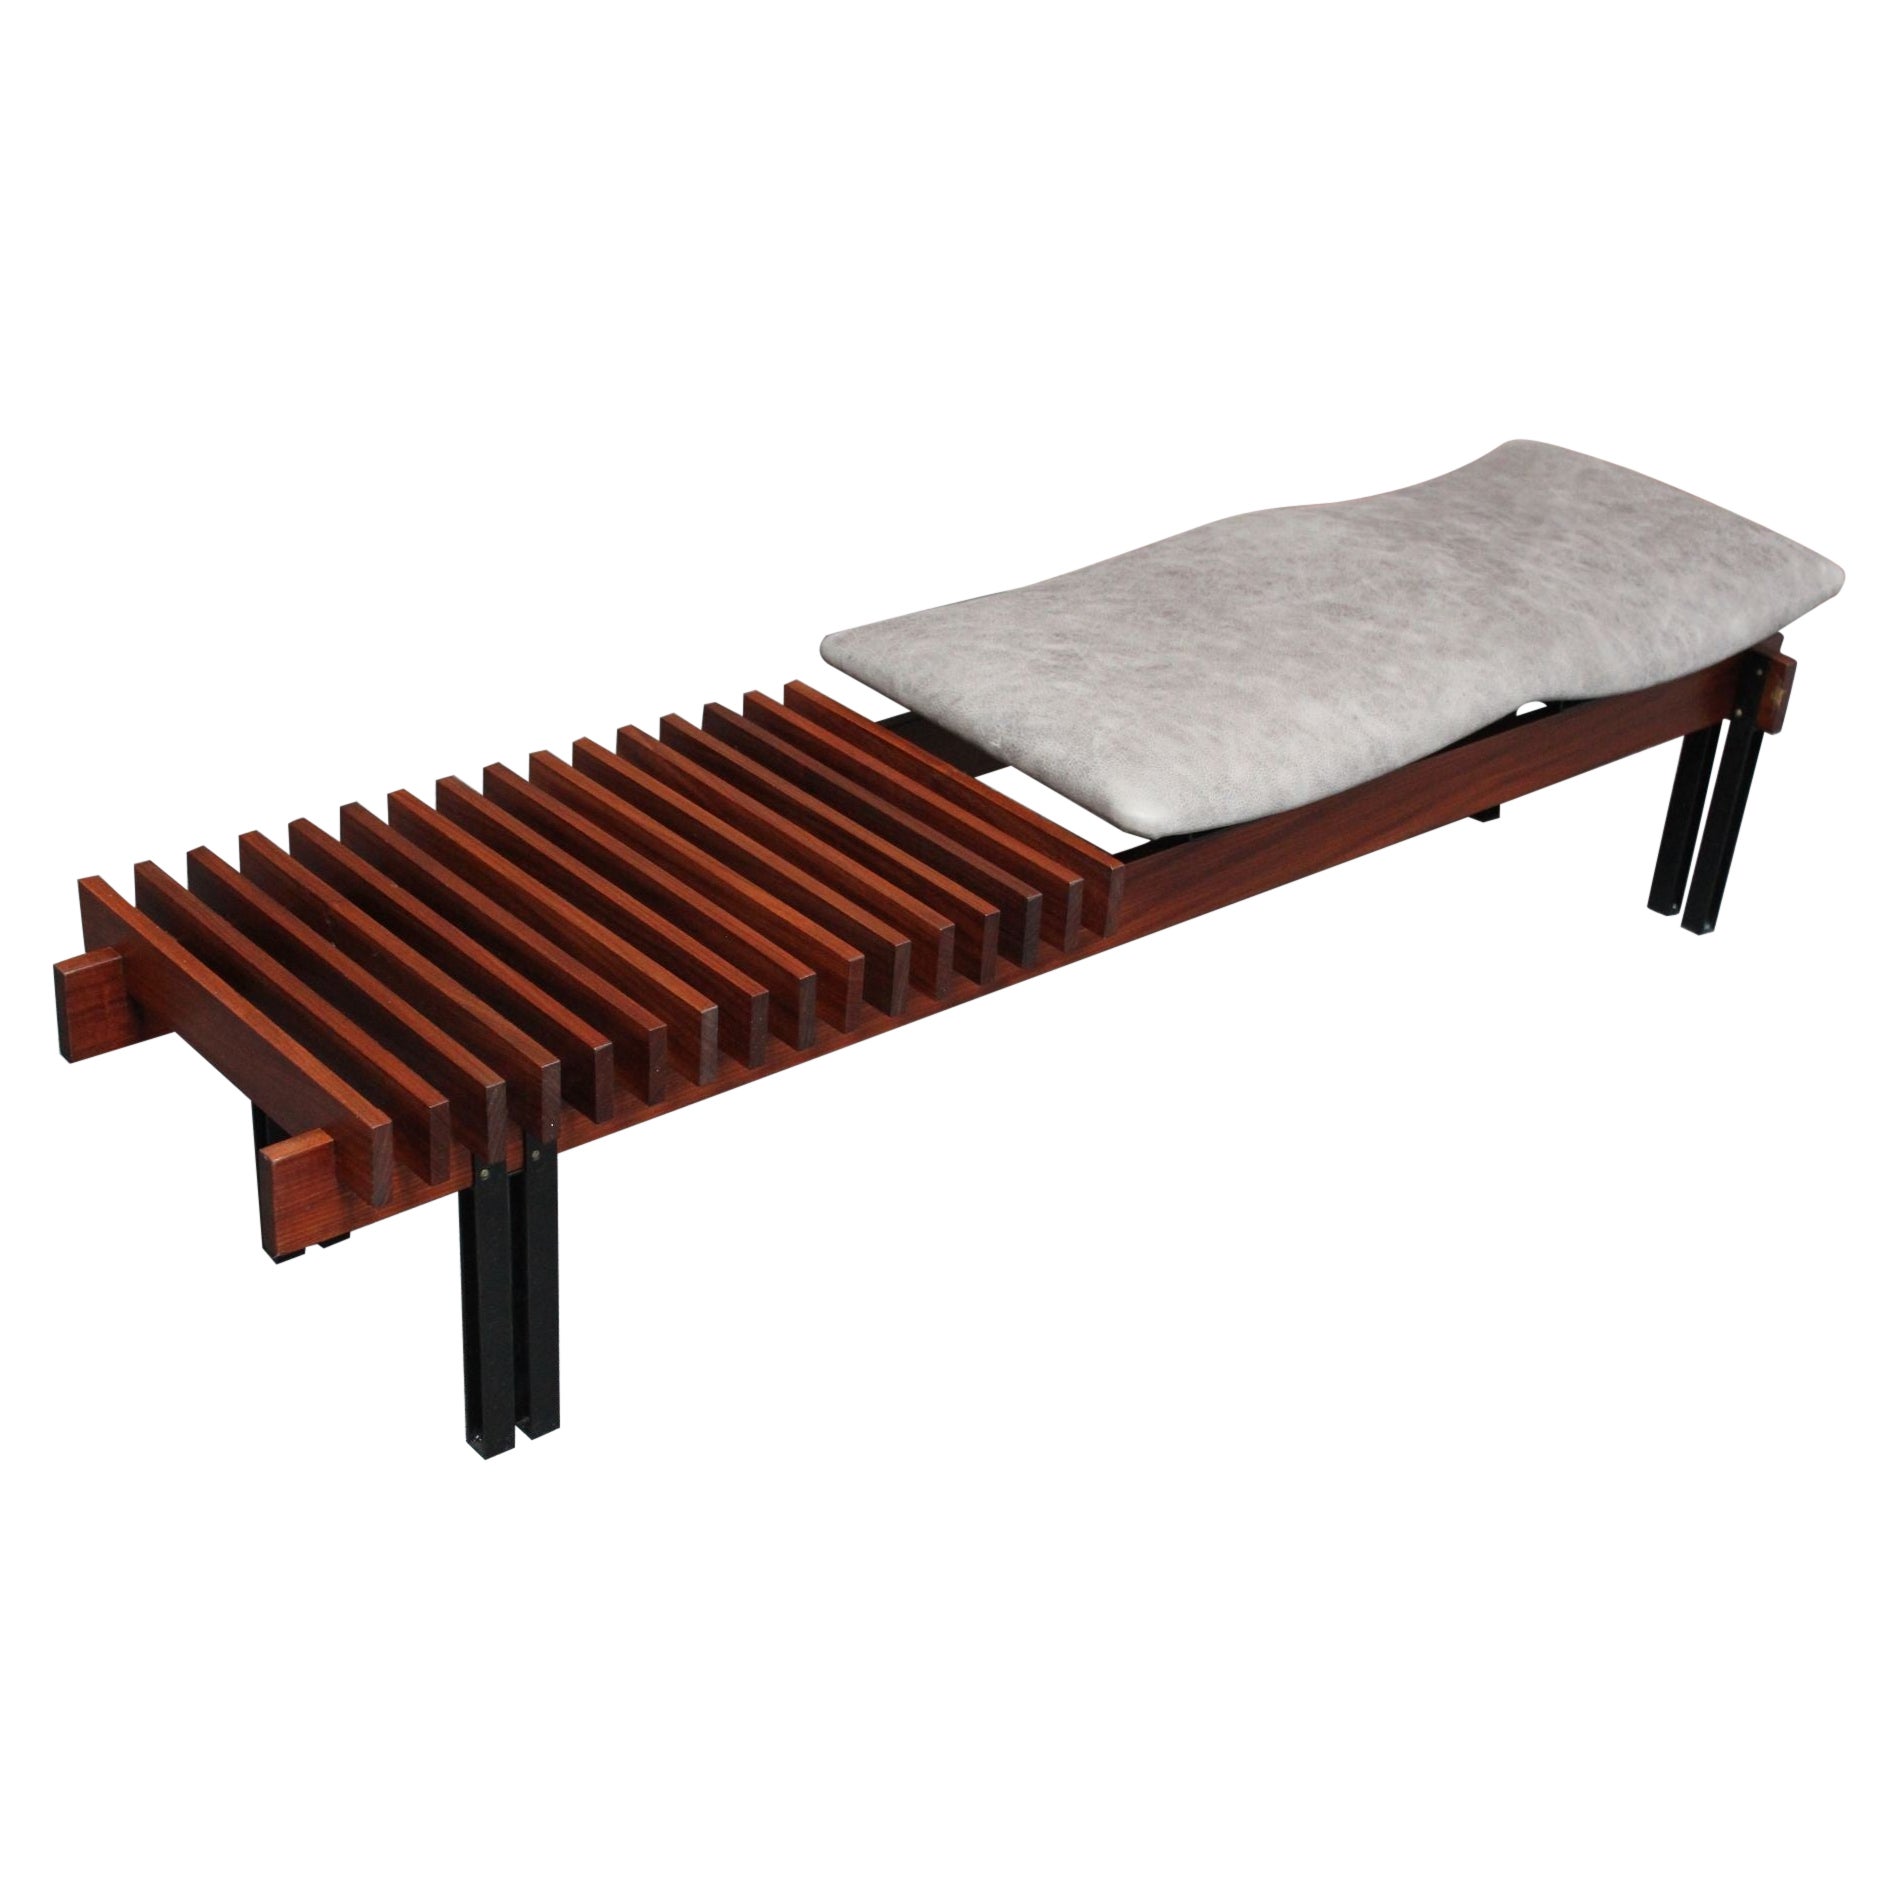 Italian Modernist Teak and Leather Bench by Inge and Luciano Rubino For  Sale at 1stDibs